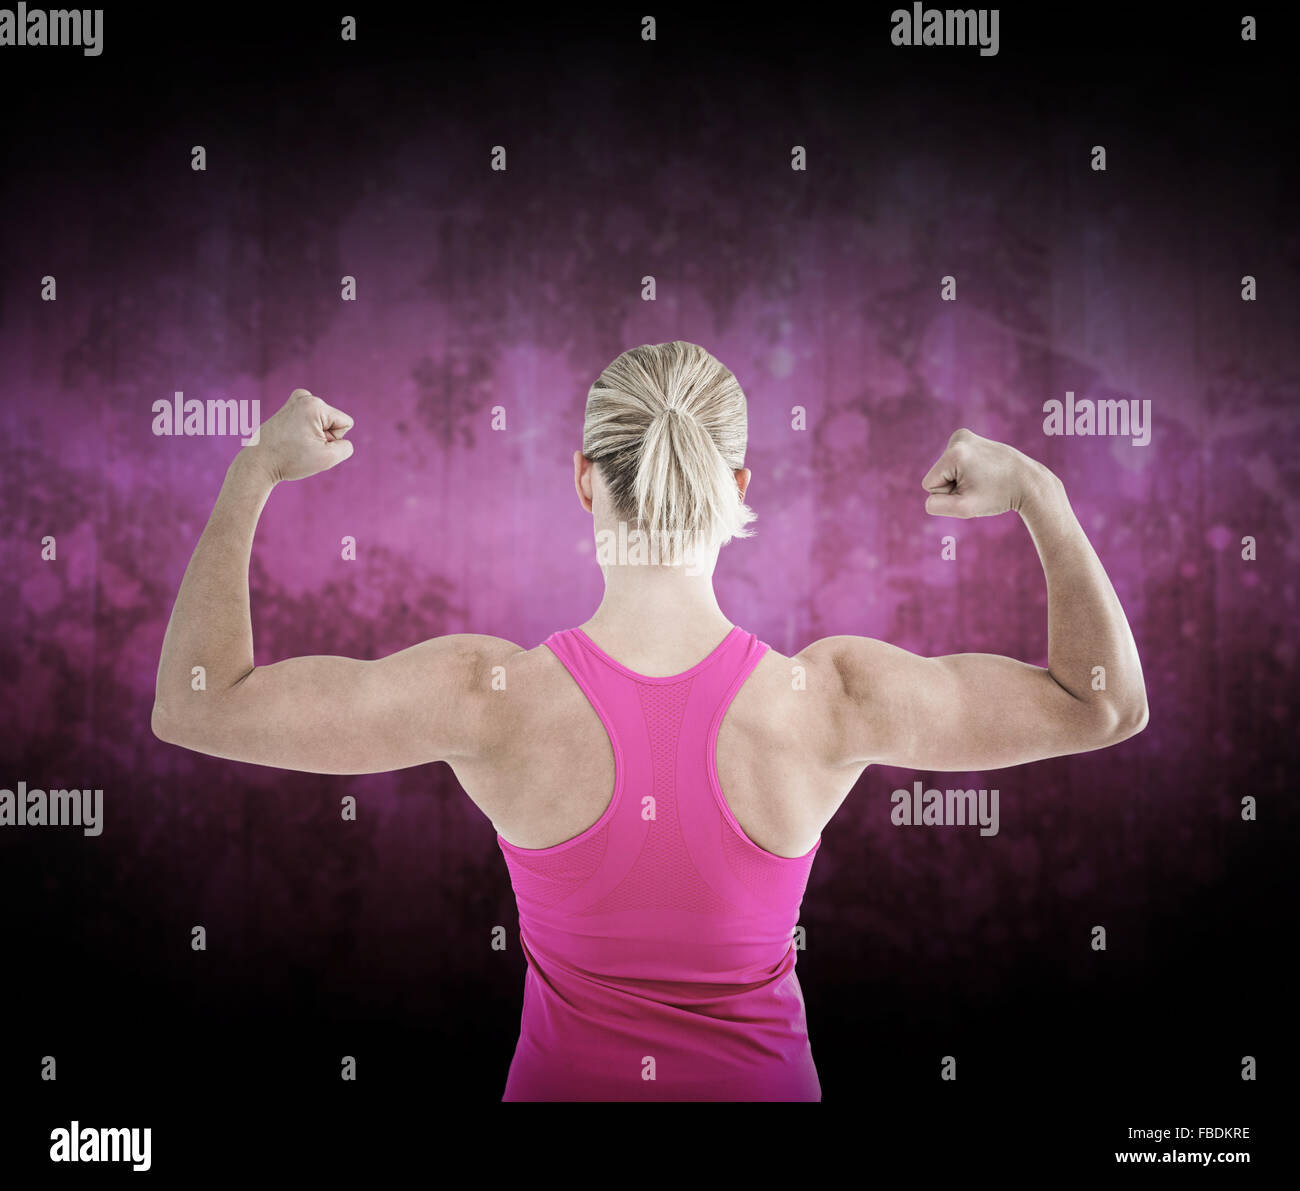 Composite image of rear view of muscular woman flexing muscles Stock Photo